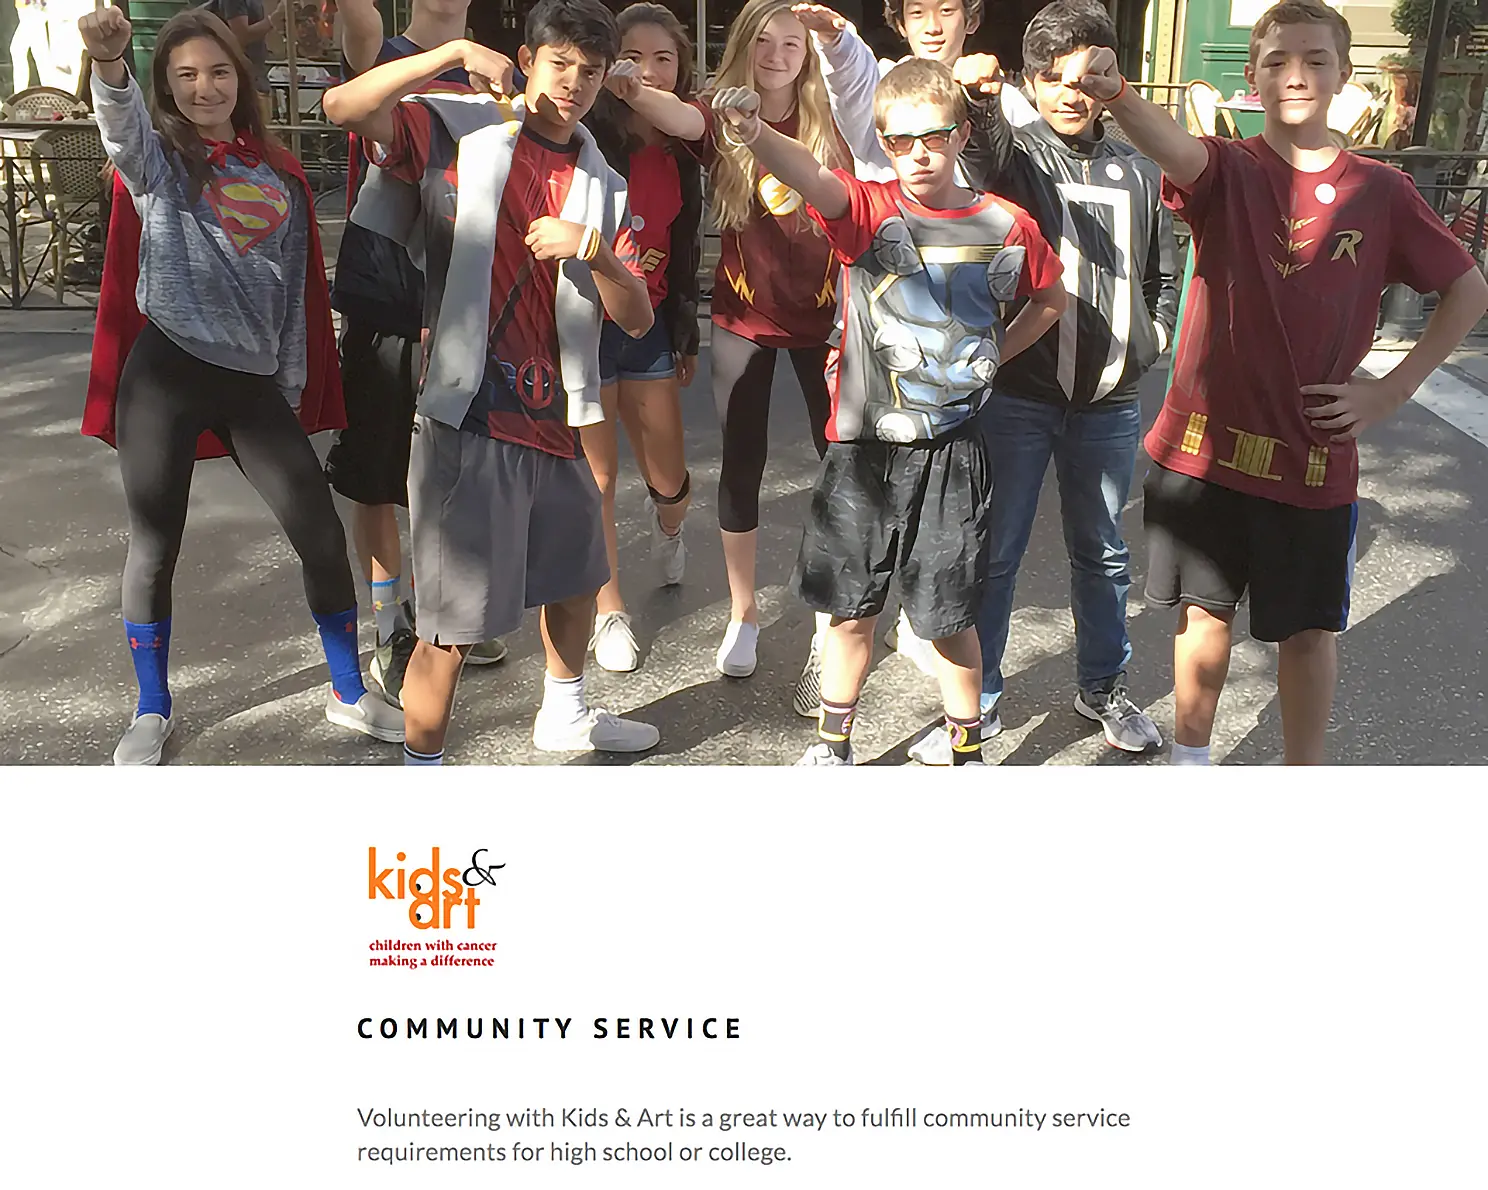 Landing page focused on community service for high schoolers.